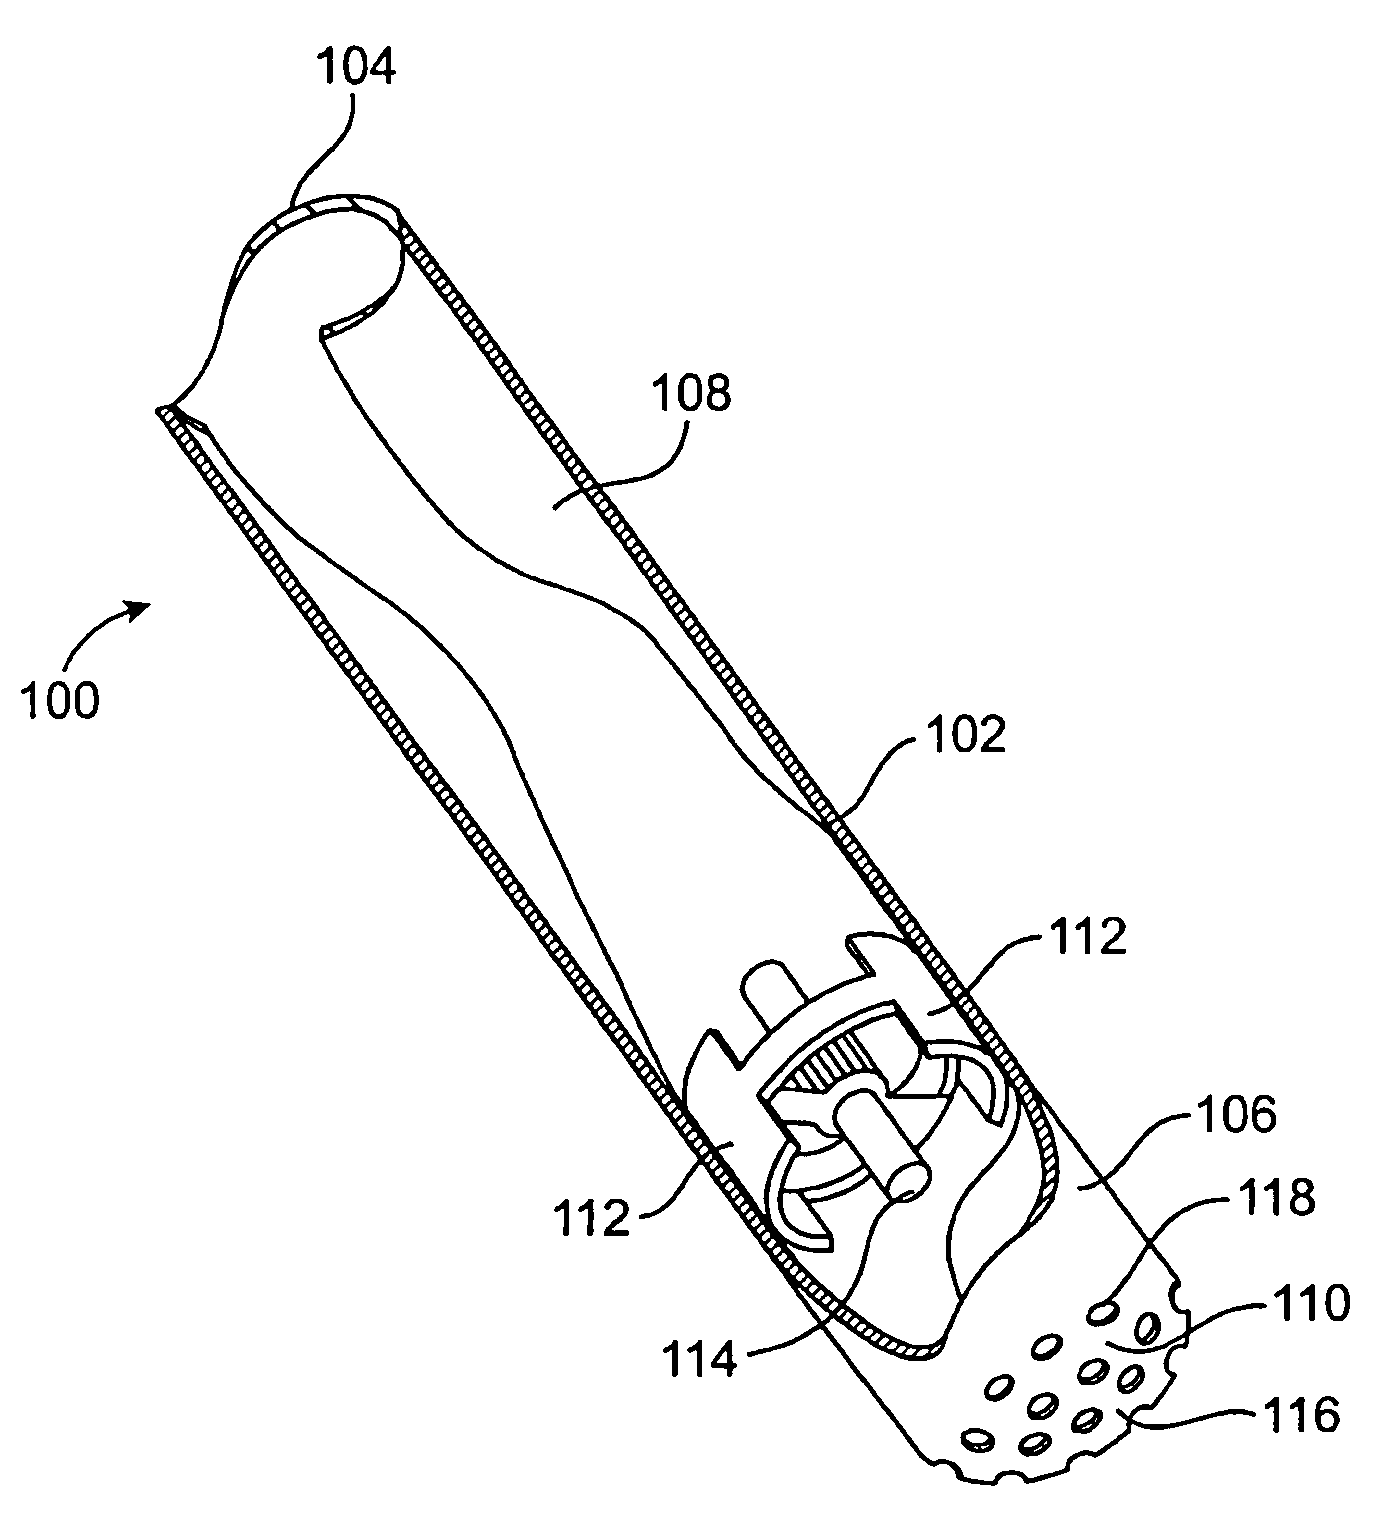 Fat removal and nerve protection device and method